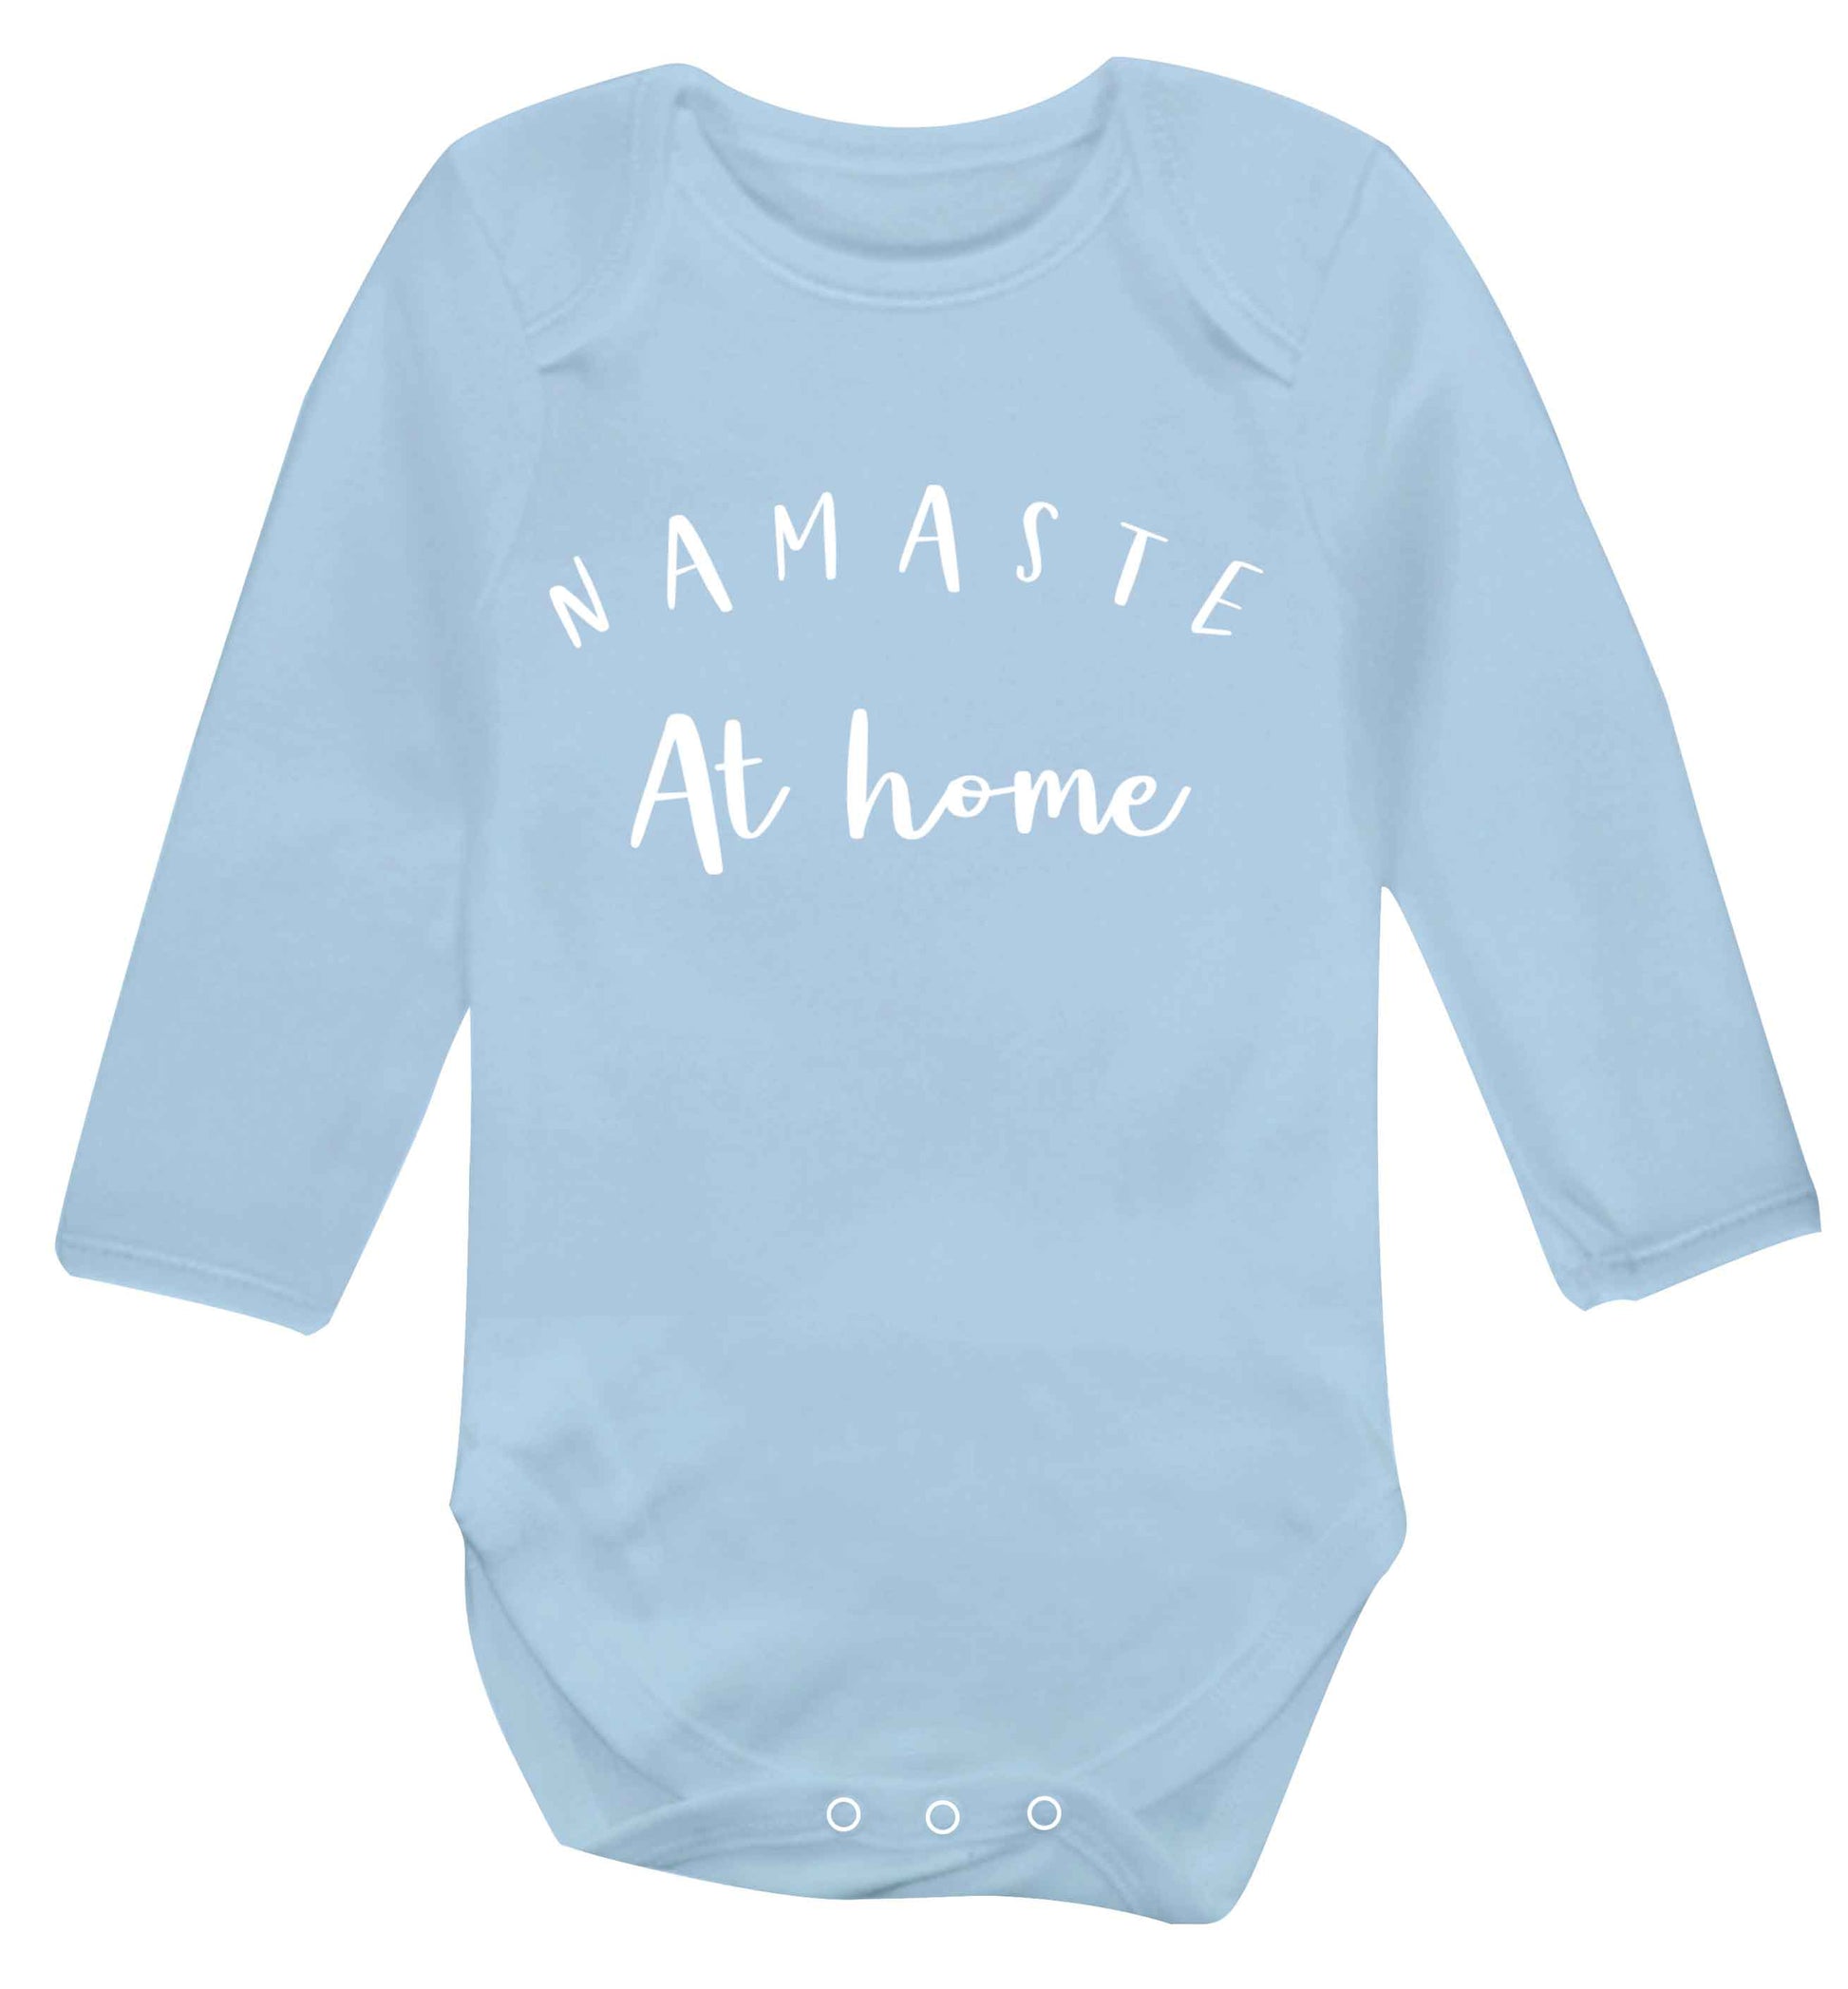 Namaste at home Baby Vest long sleeved pale blue 6-12 months